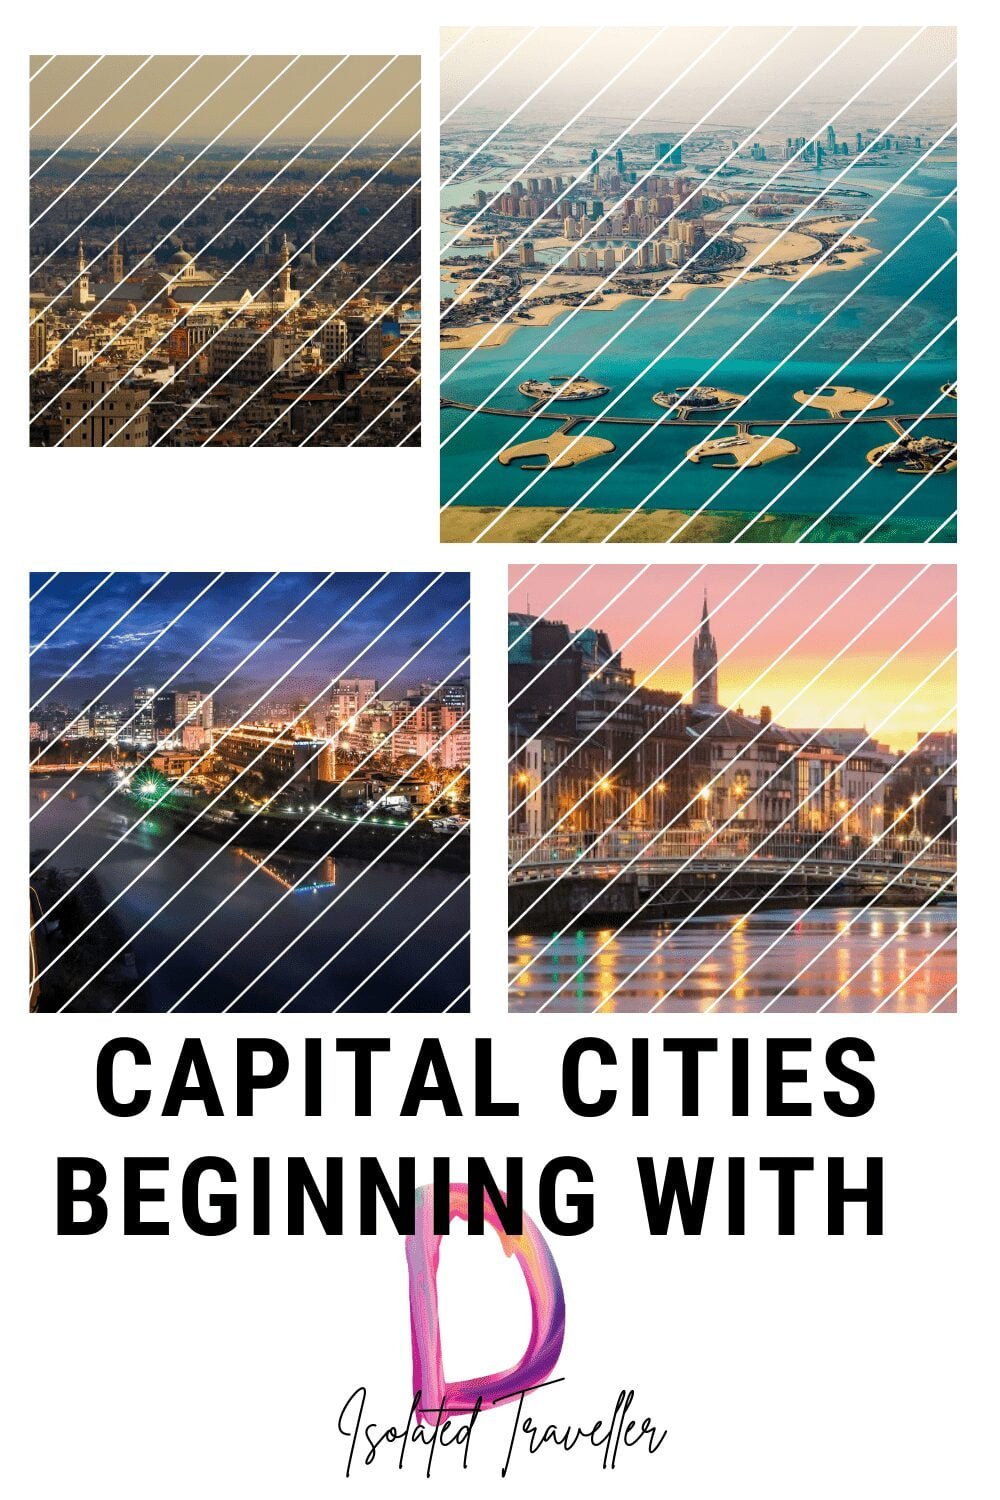 Capital Cities beginning with D